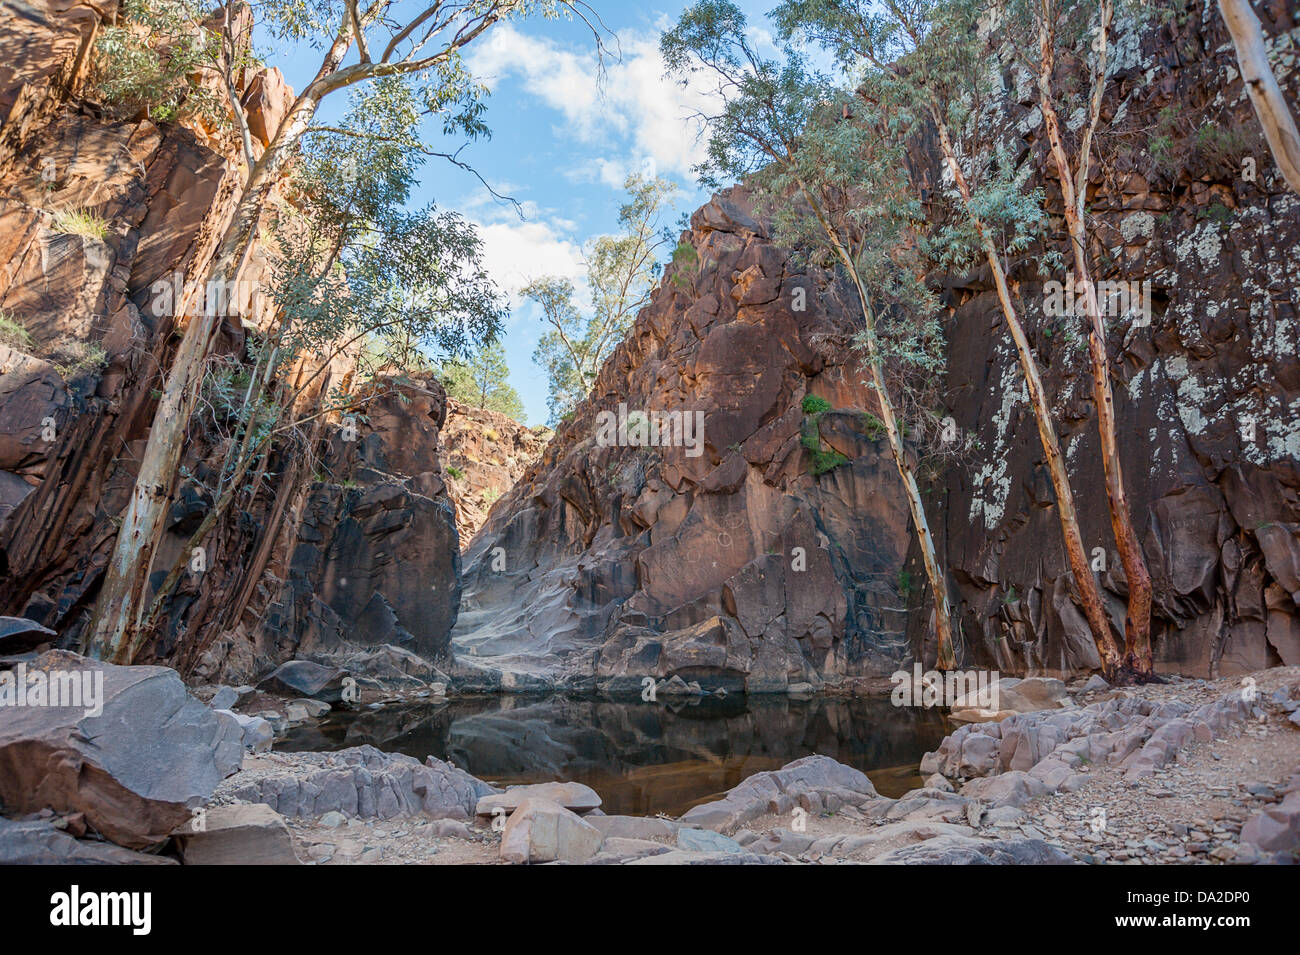 Sacred Canyon in the ruggedly beautiful Flinders Ranges in the Australian outback. A traditional Aboriginal meeting place containing rock carvings a Stock Photo